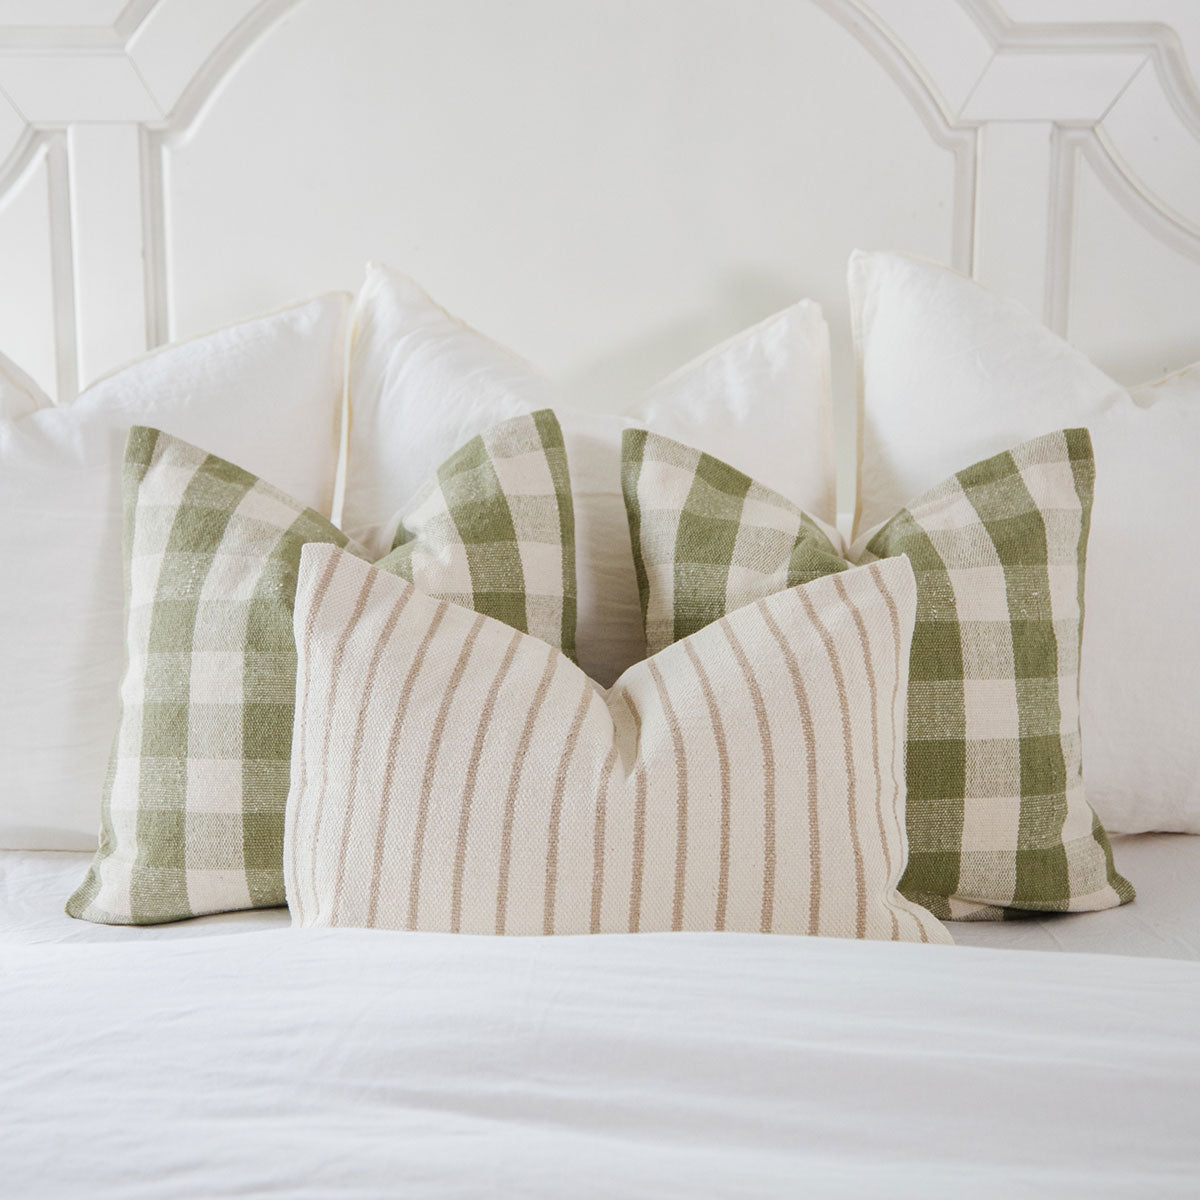 Signature Woven Olive Green Gingham Pillow Cover